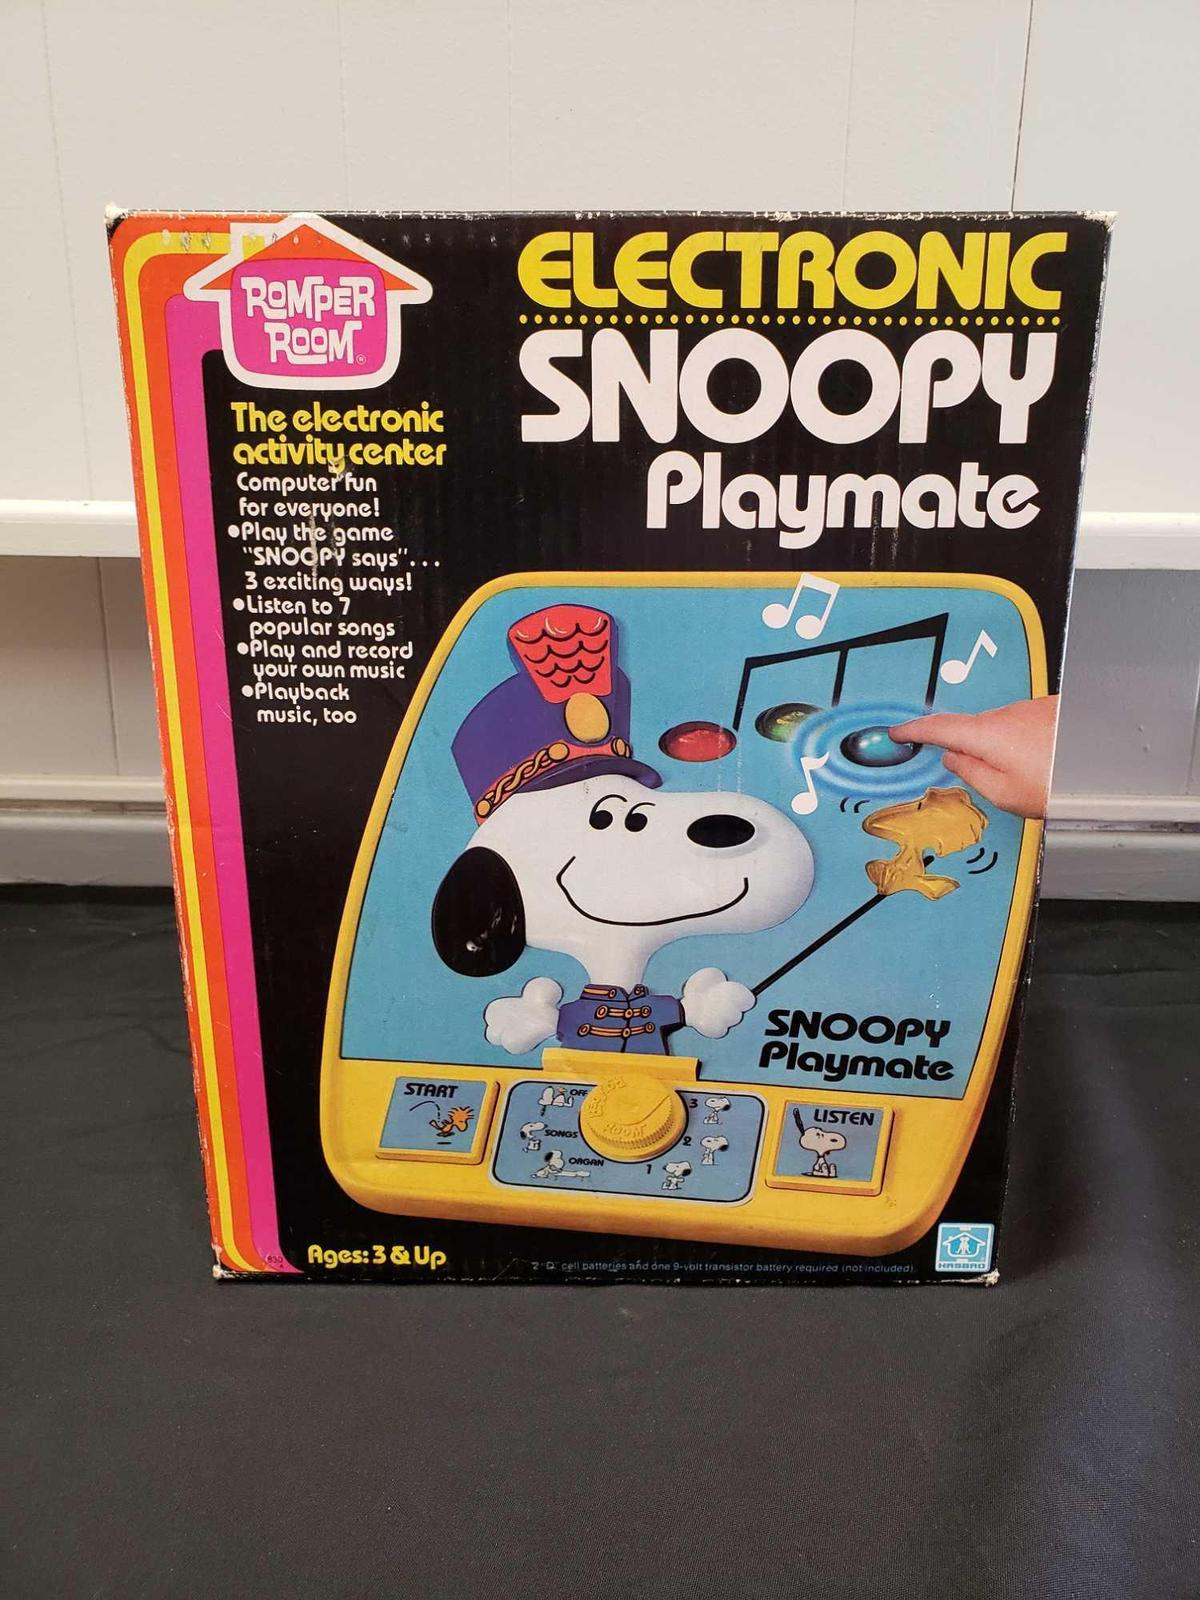 Electronic Snoopy Playmate Romper Room the electric activity center (factory sealed)